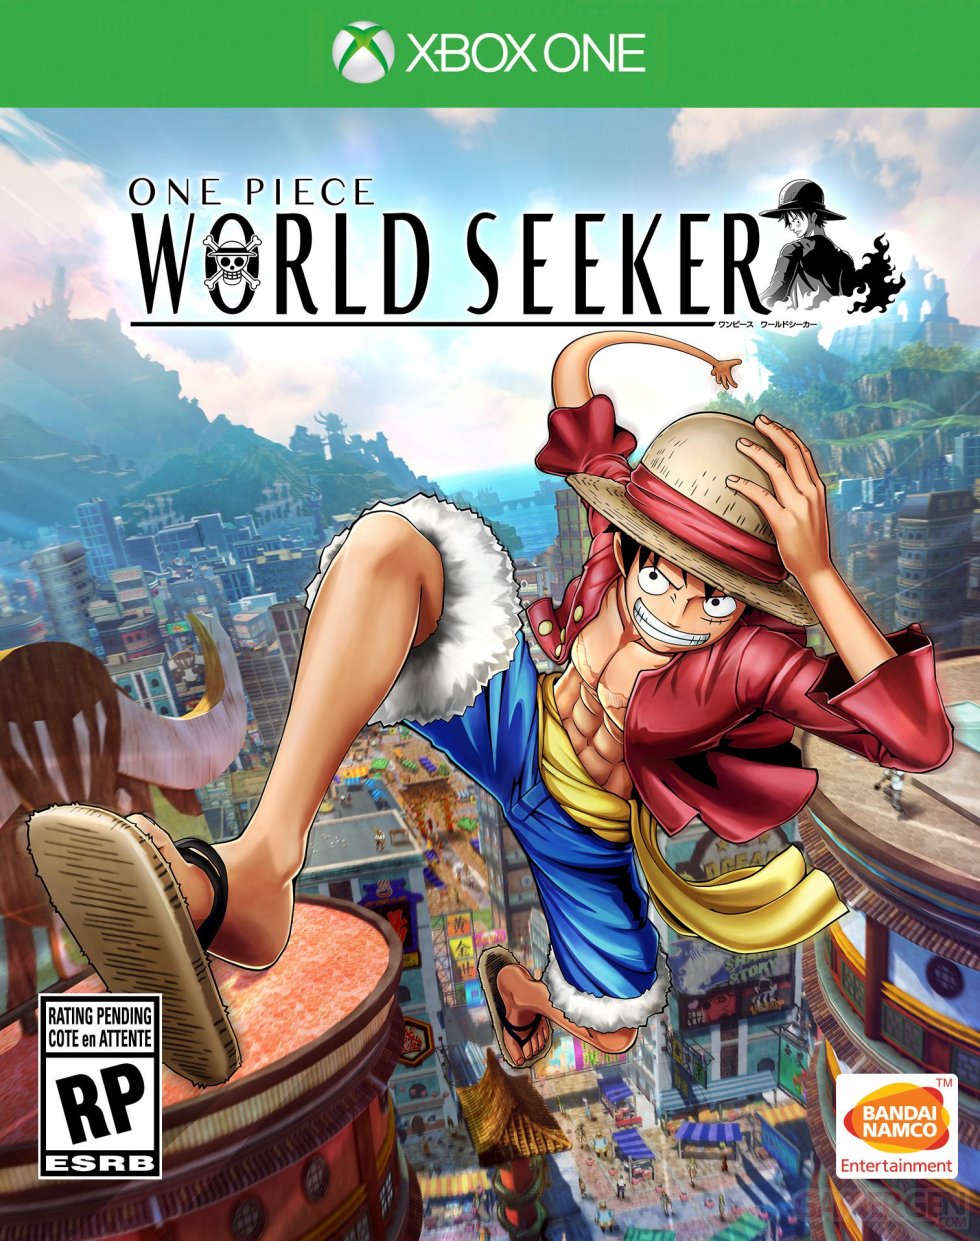 One-Piece-World-Seeker-jaquette-Xbox-One-US-19-09-2018